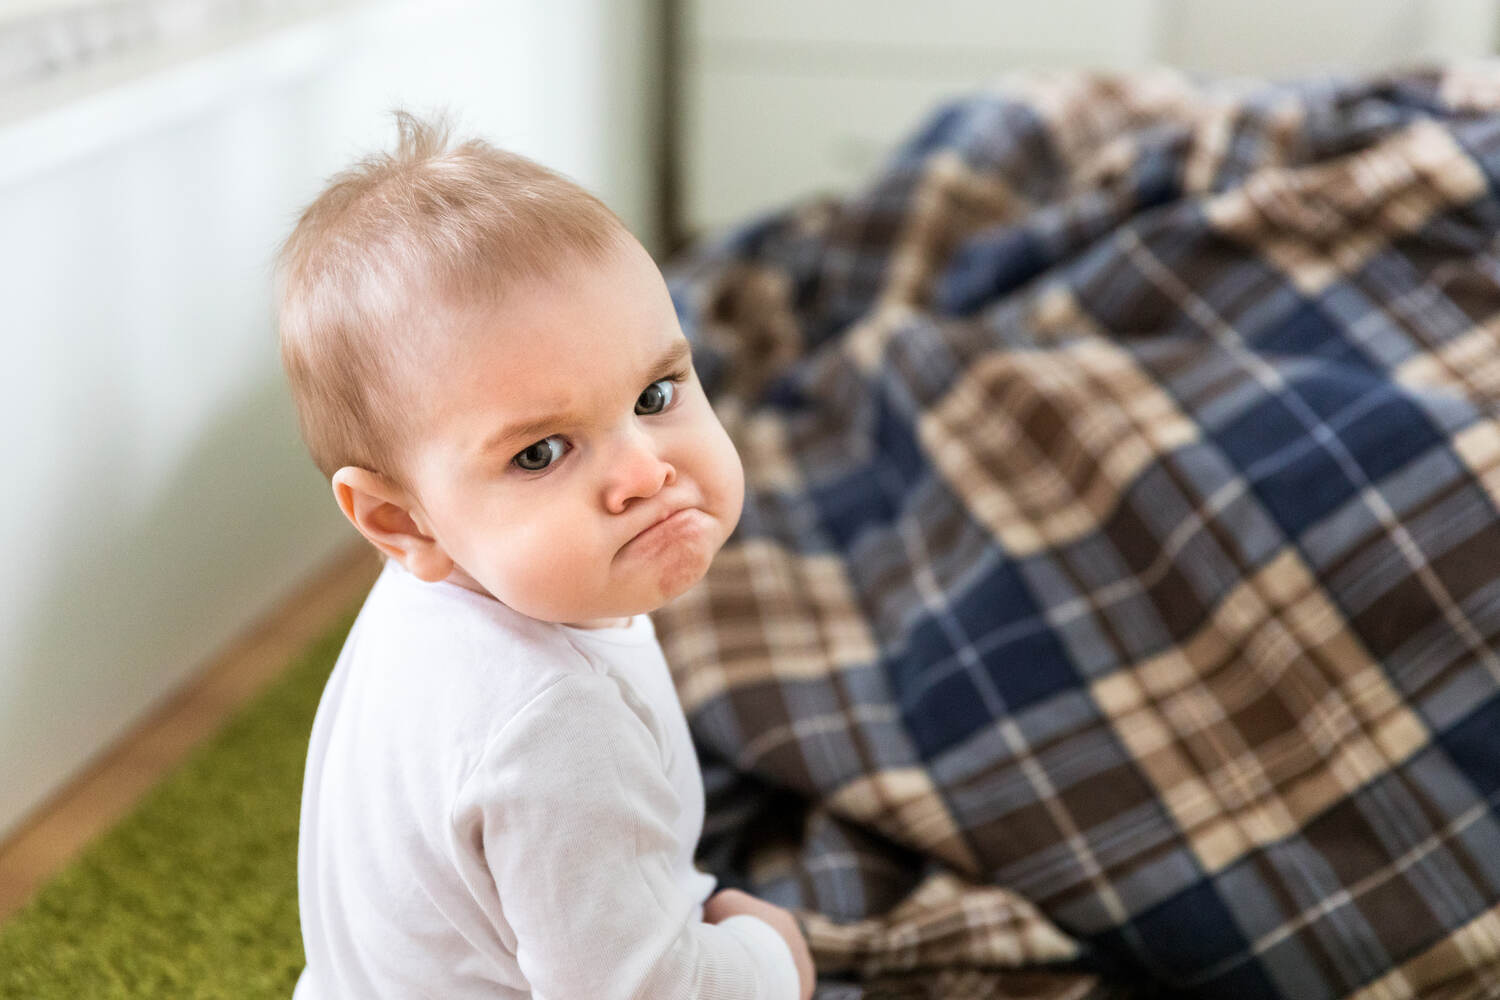 One should not ignore defiant behavior in toddlers